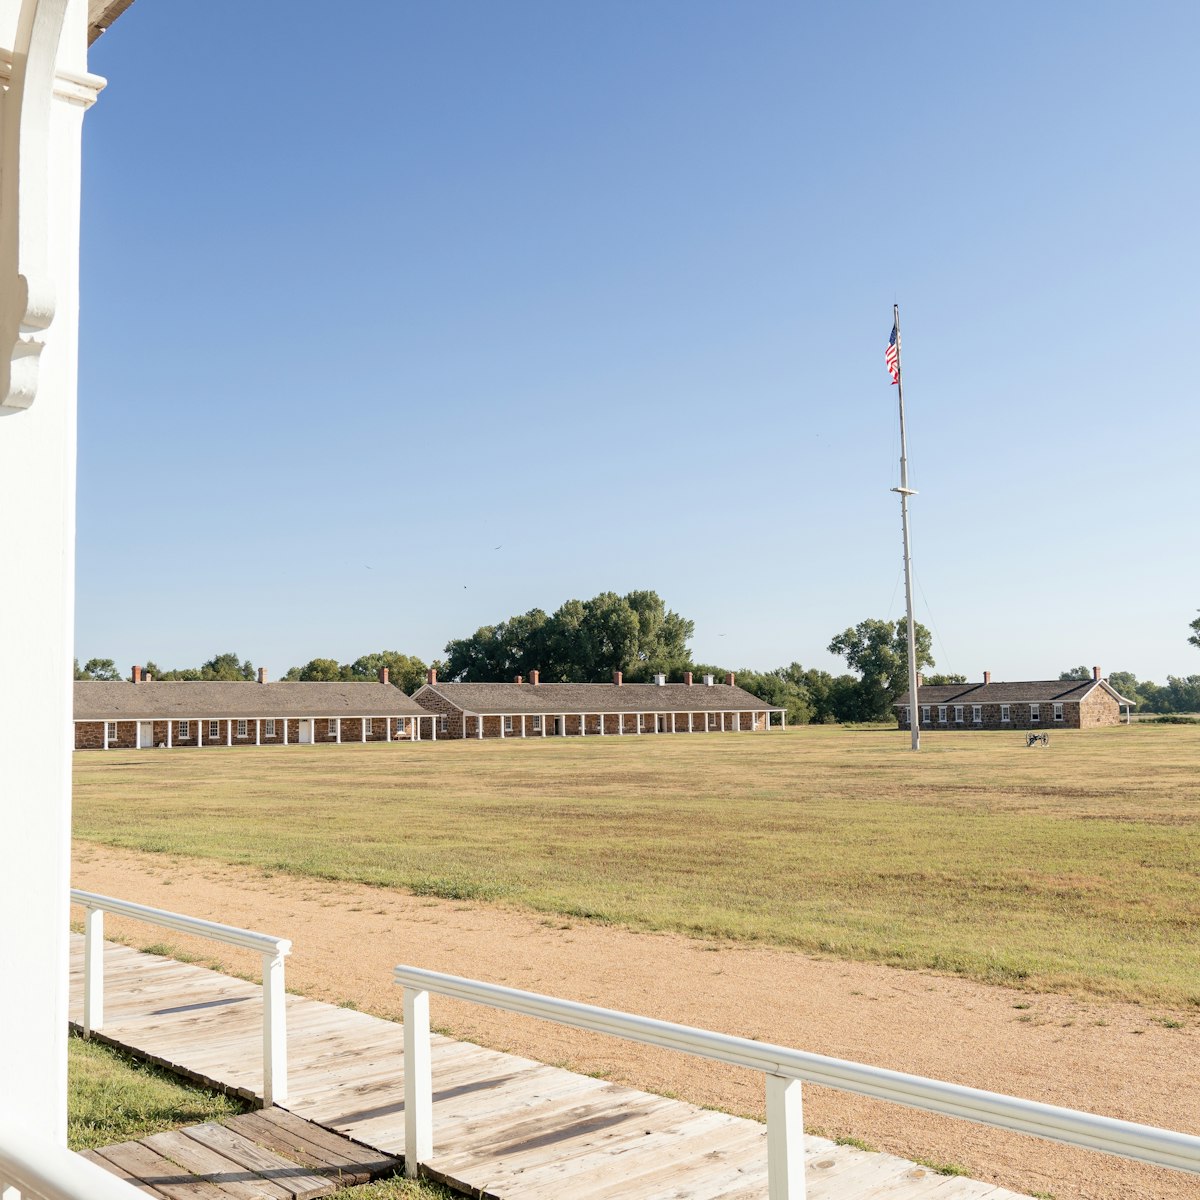 The grounds at Fort Larned National Historic Site.